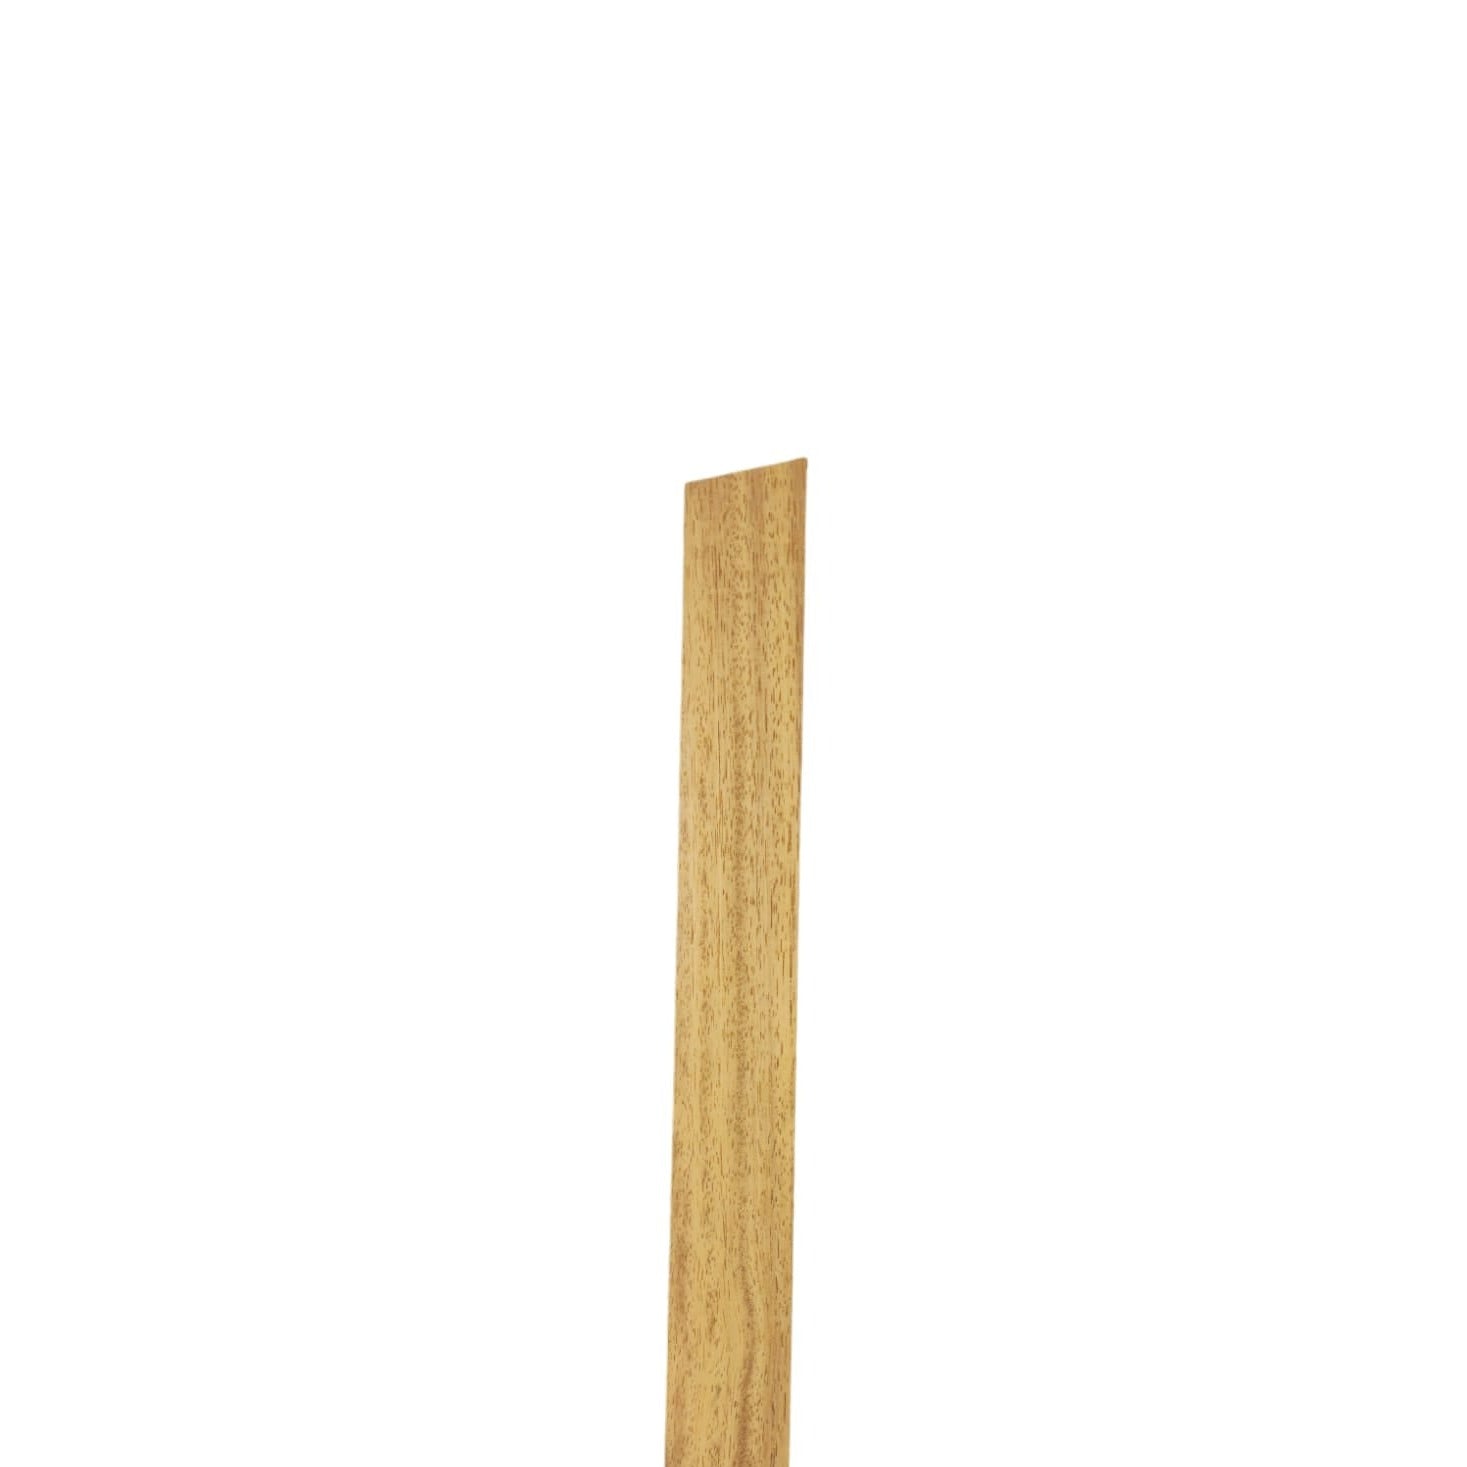 Side view of the 95mm x 45mm Iroko Wall Post